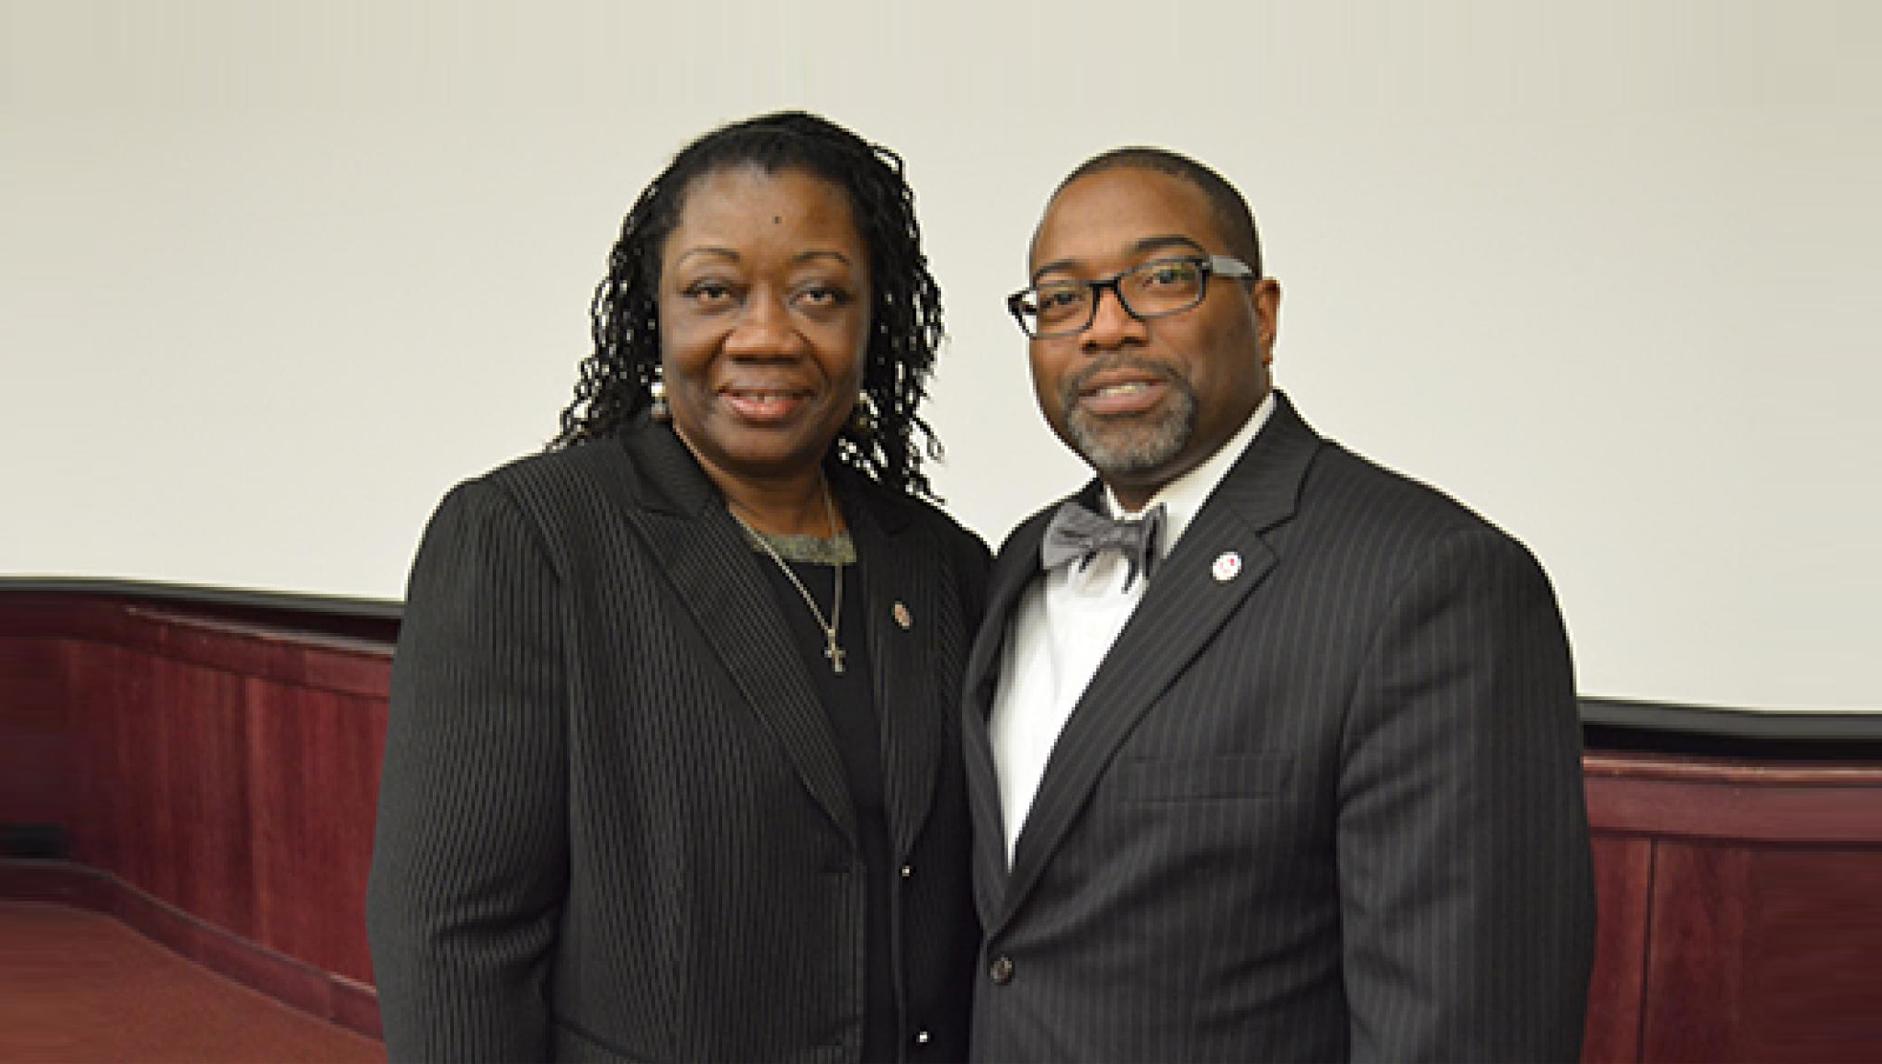 At left, Elsie Wallace Smalls and Calvin R. Hill, PhD, vice president for inclusion and community engagement at Springfield College.